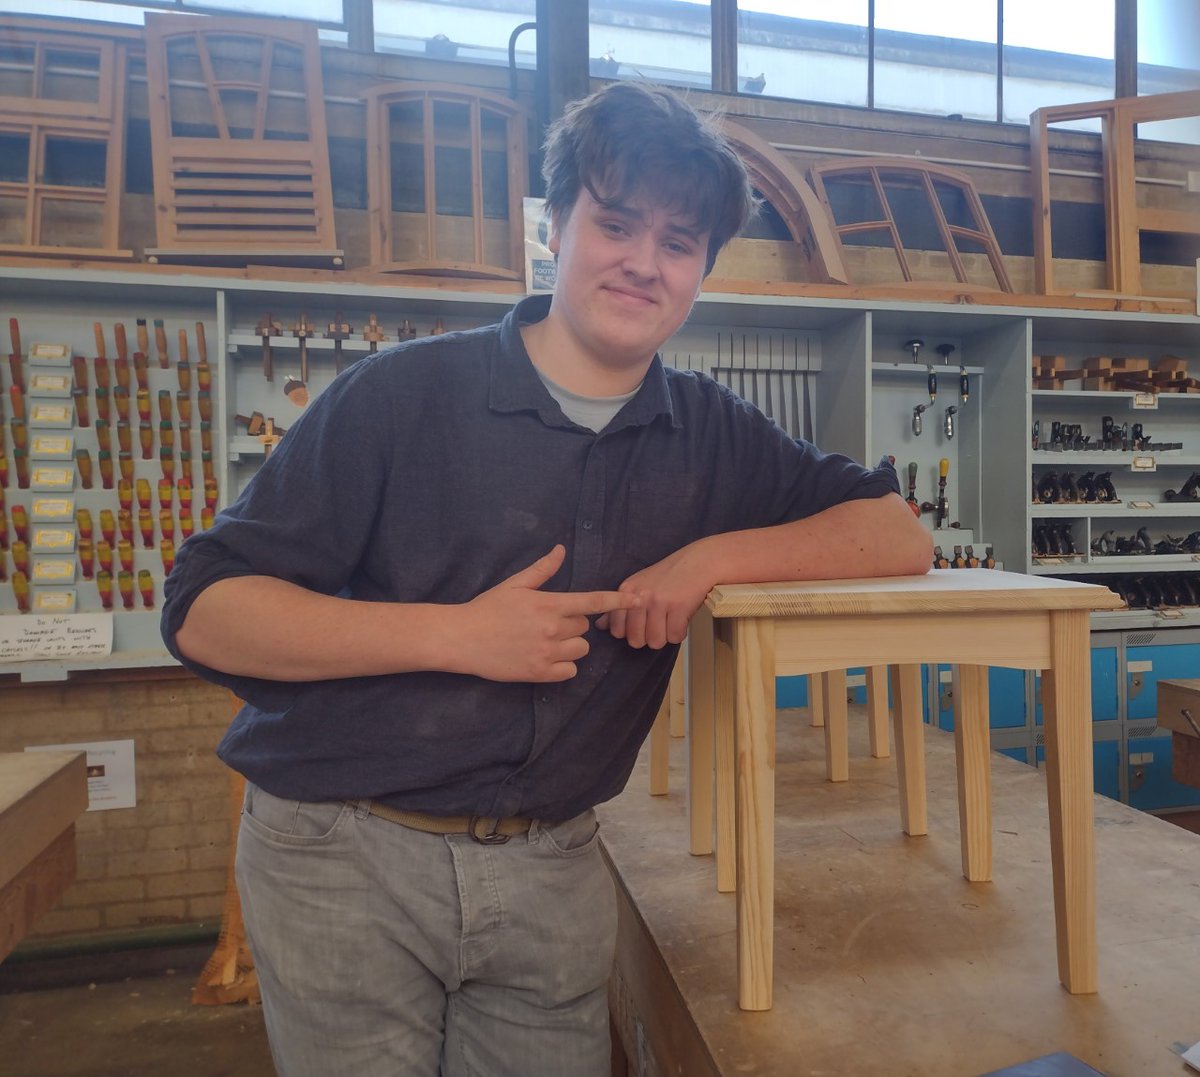 We have some very exciting news to share! 👀 We're thrilled to announce that our wonderful furniture wood machining student, Matthew Mccarthy, has officially made it to the @CITB_UK SkillBuild National Finals! 🤩 Bring on the finals in November 🥳